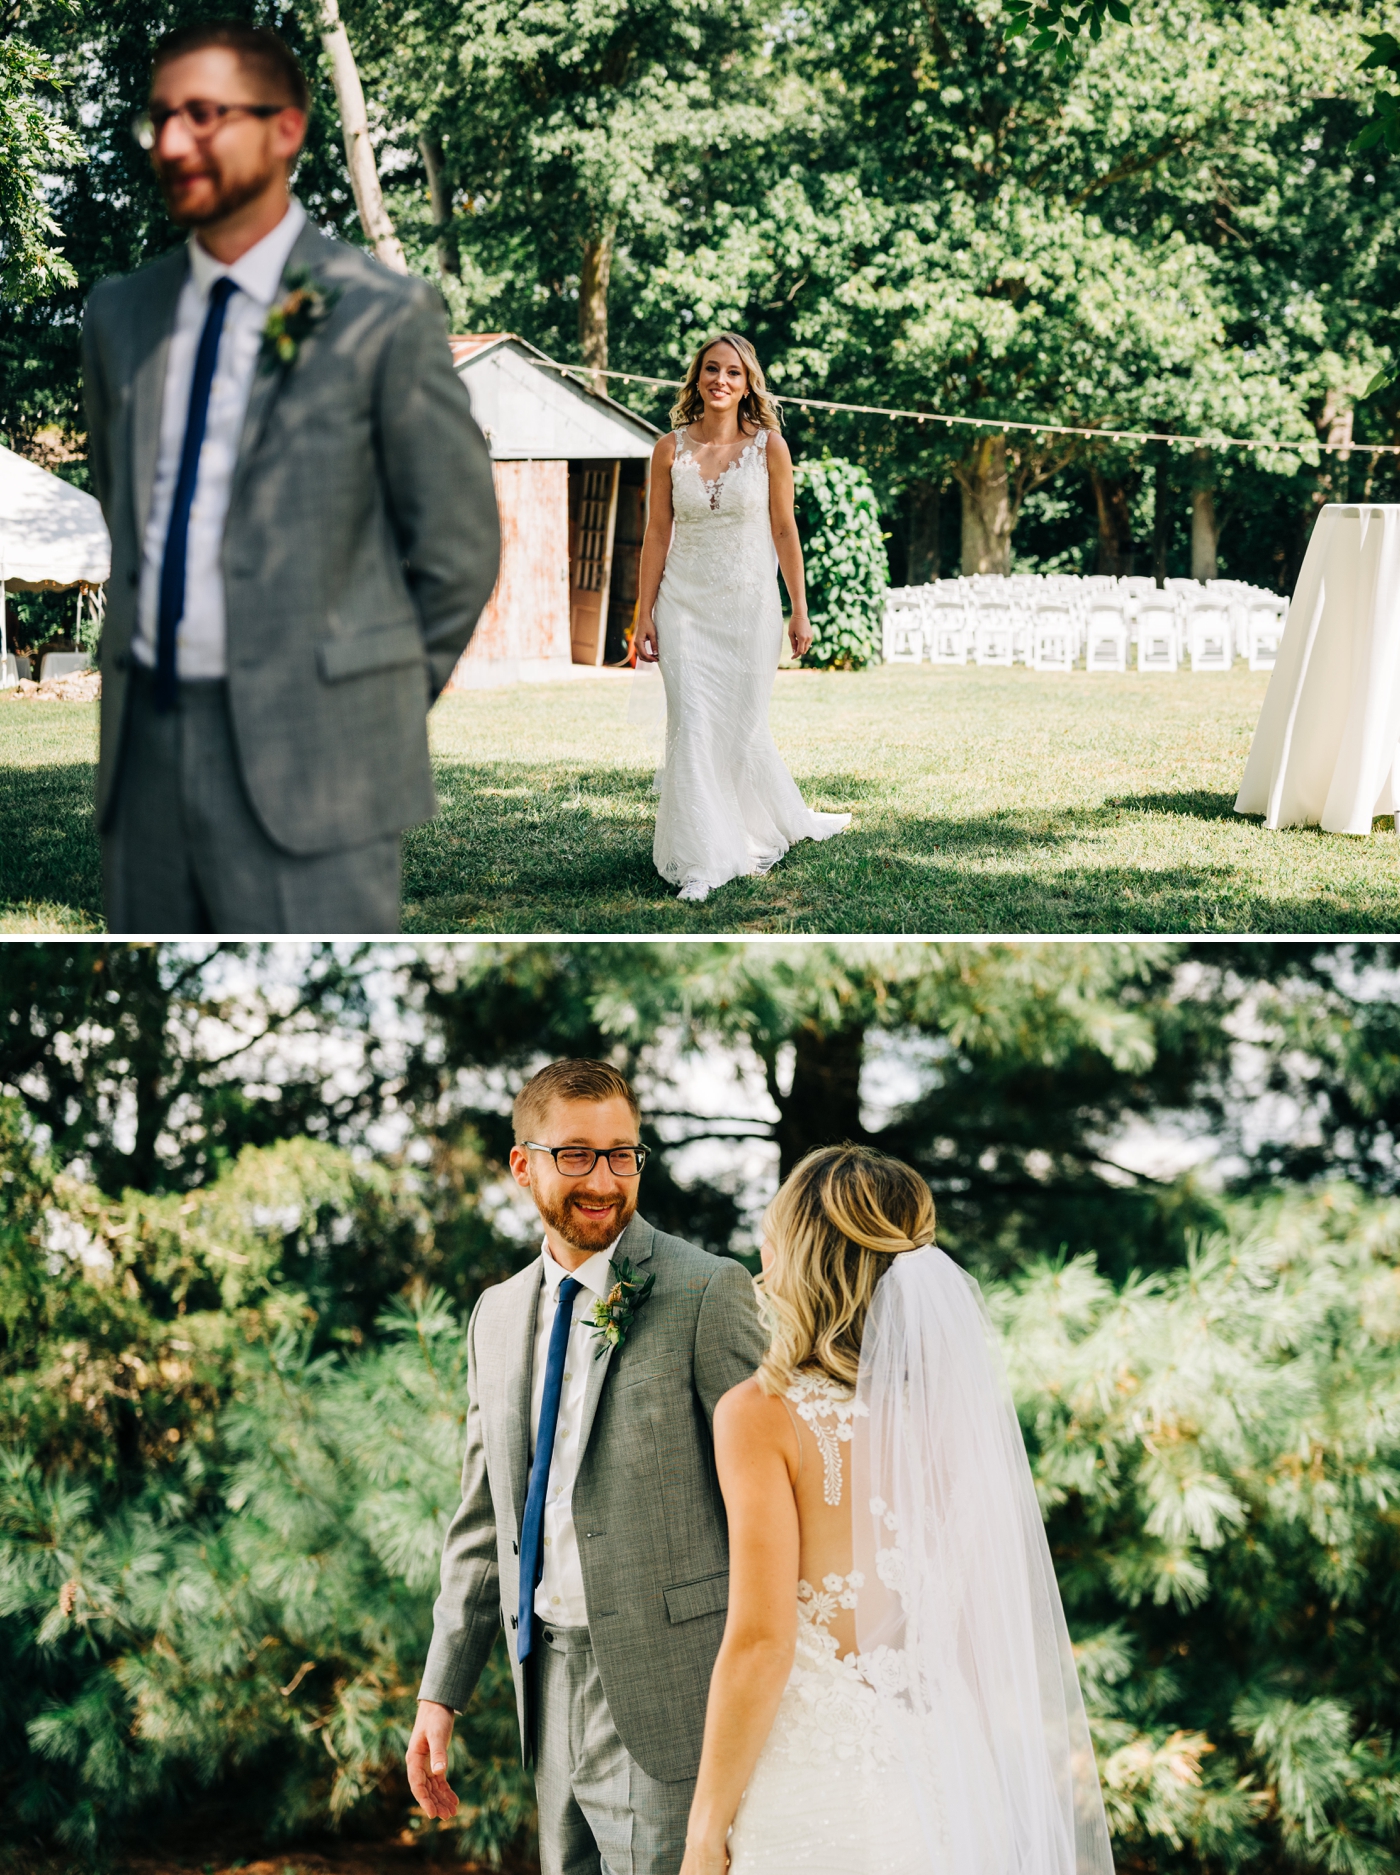 Intimate backyard wedding photographed by Mika LH Photography